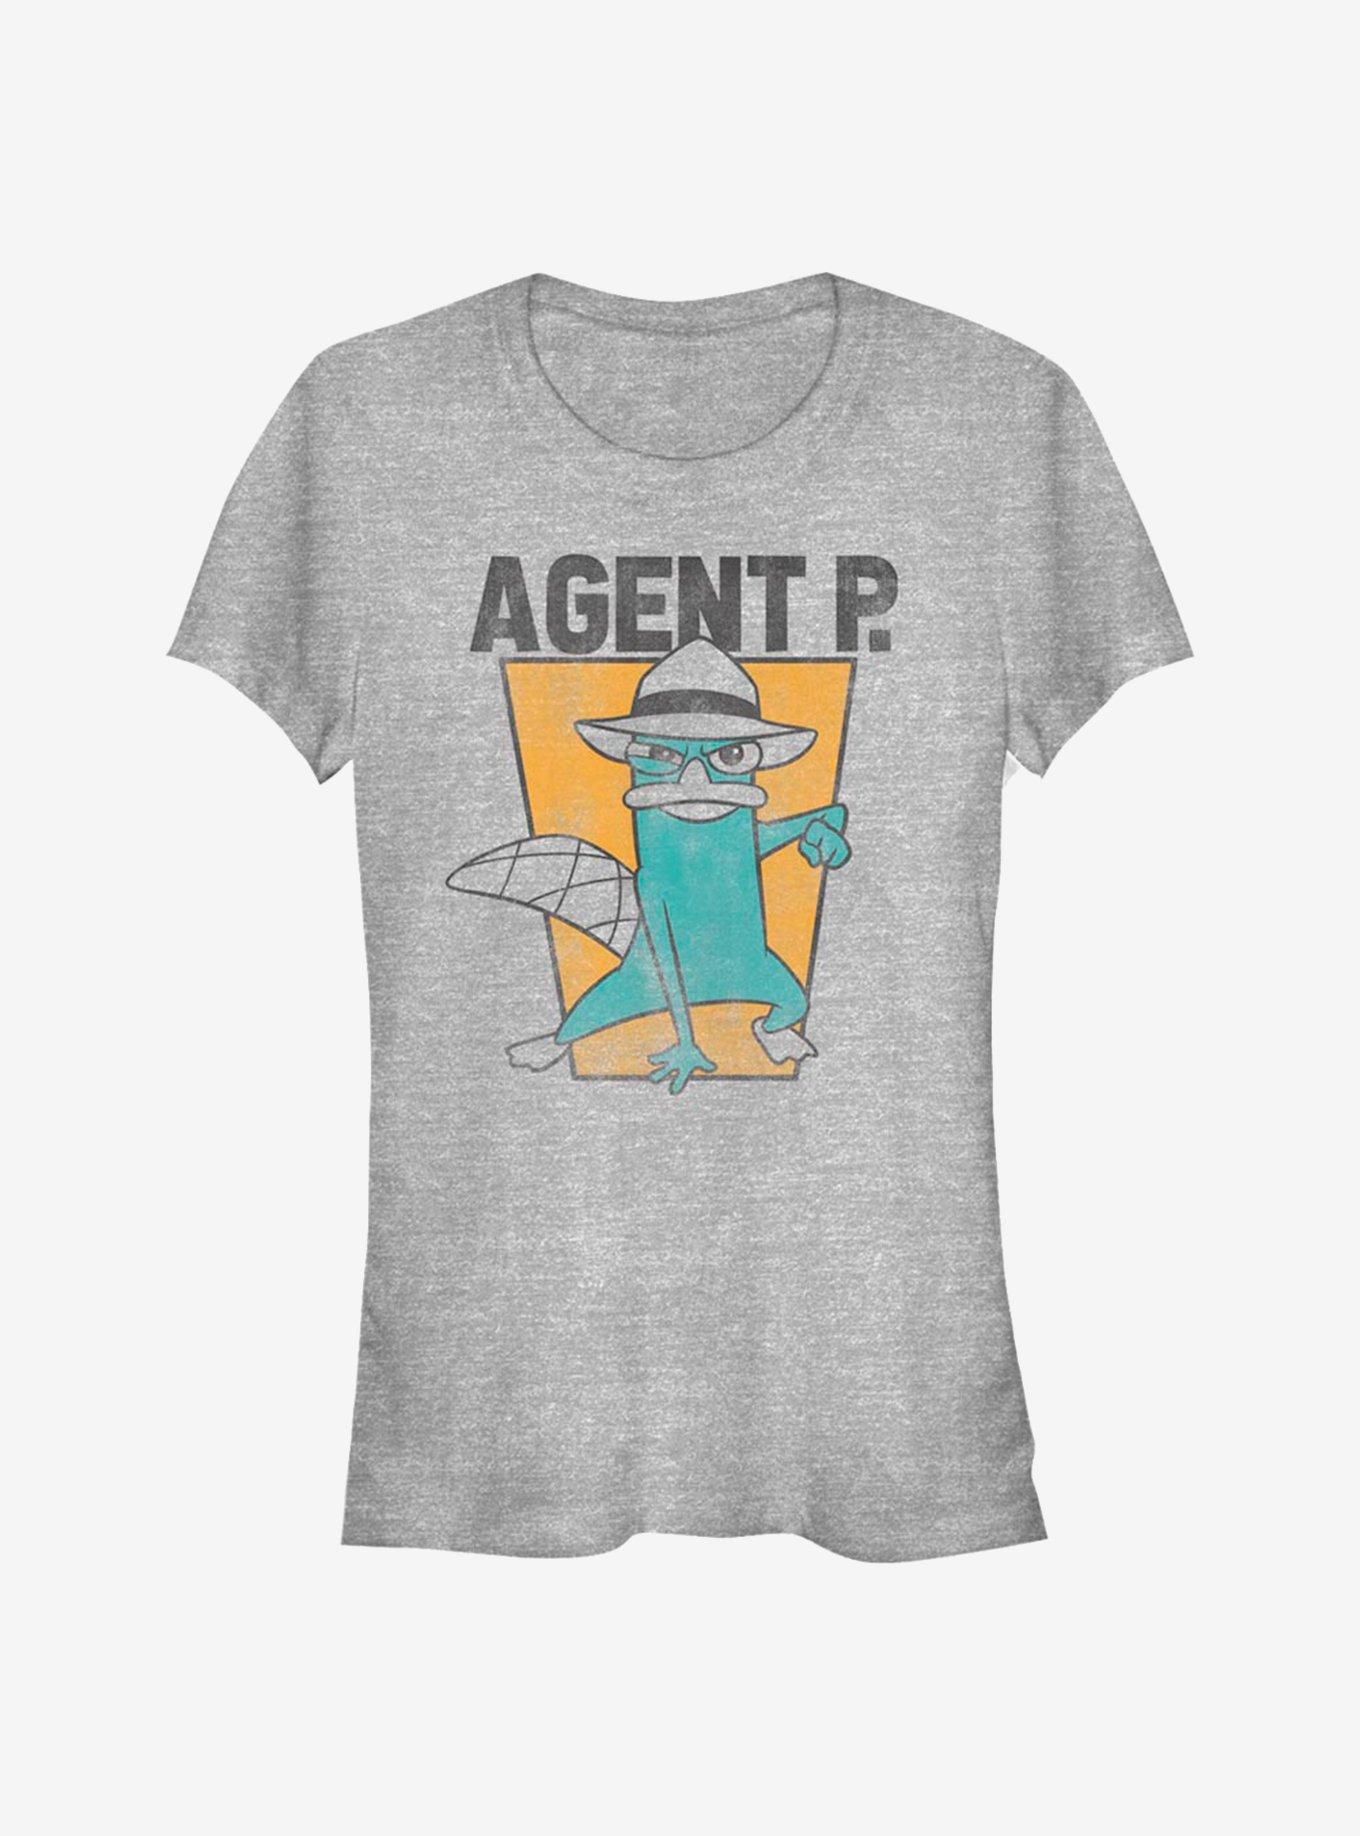 Disney Phineas And Ferb Agent P Girls T-Shirt, ATH HTR, hi-res